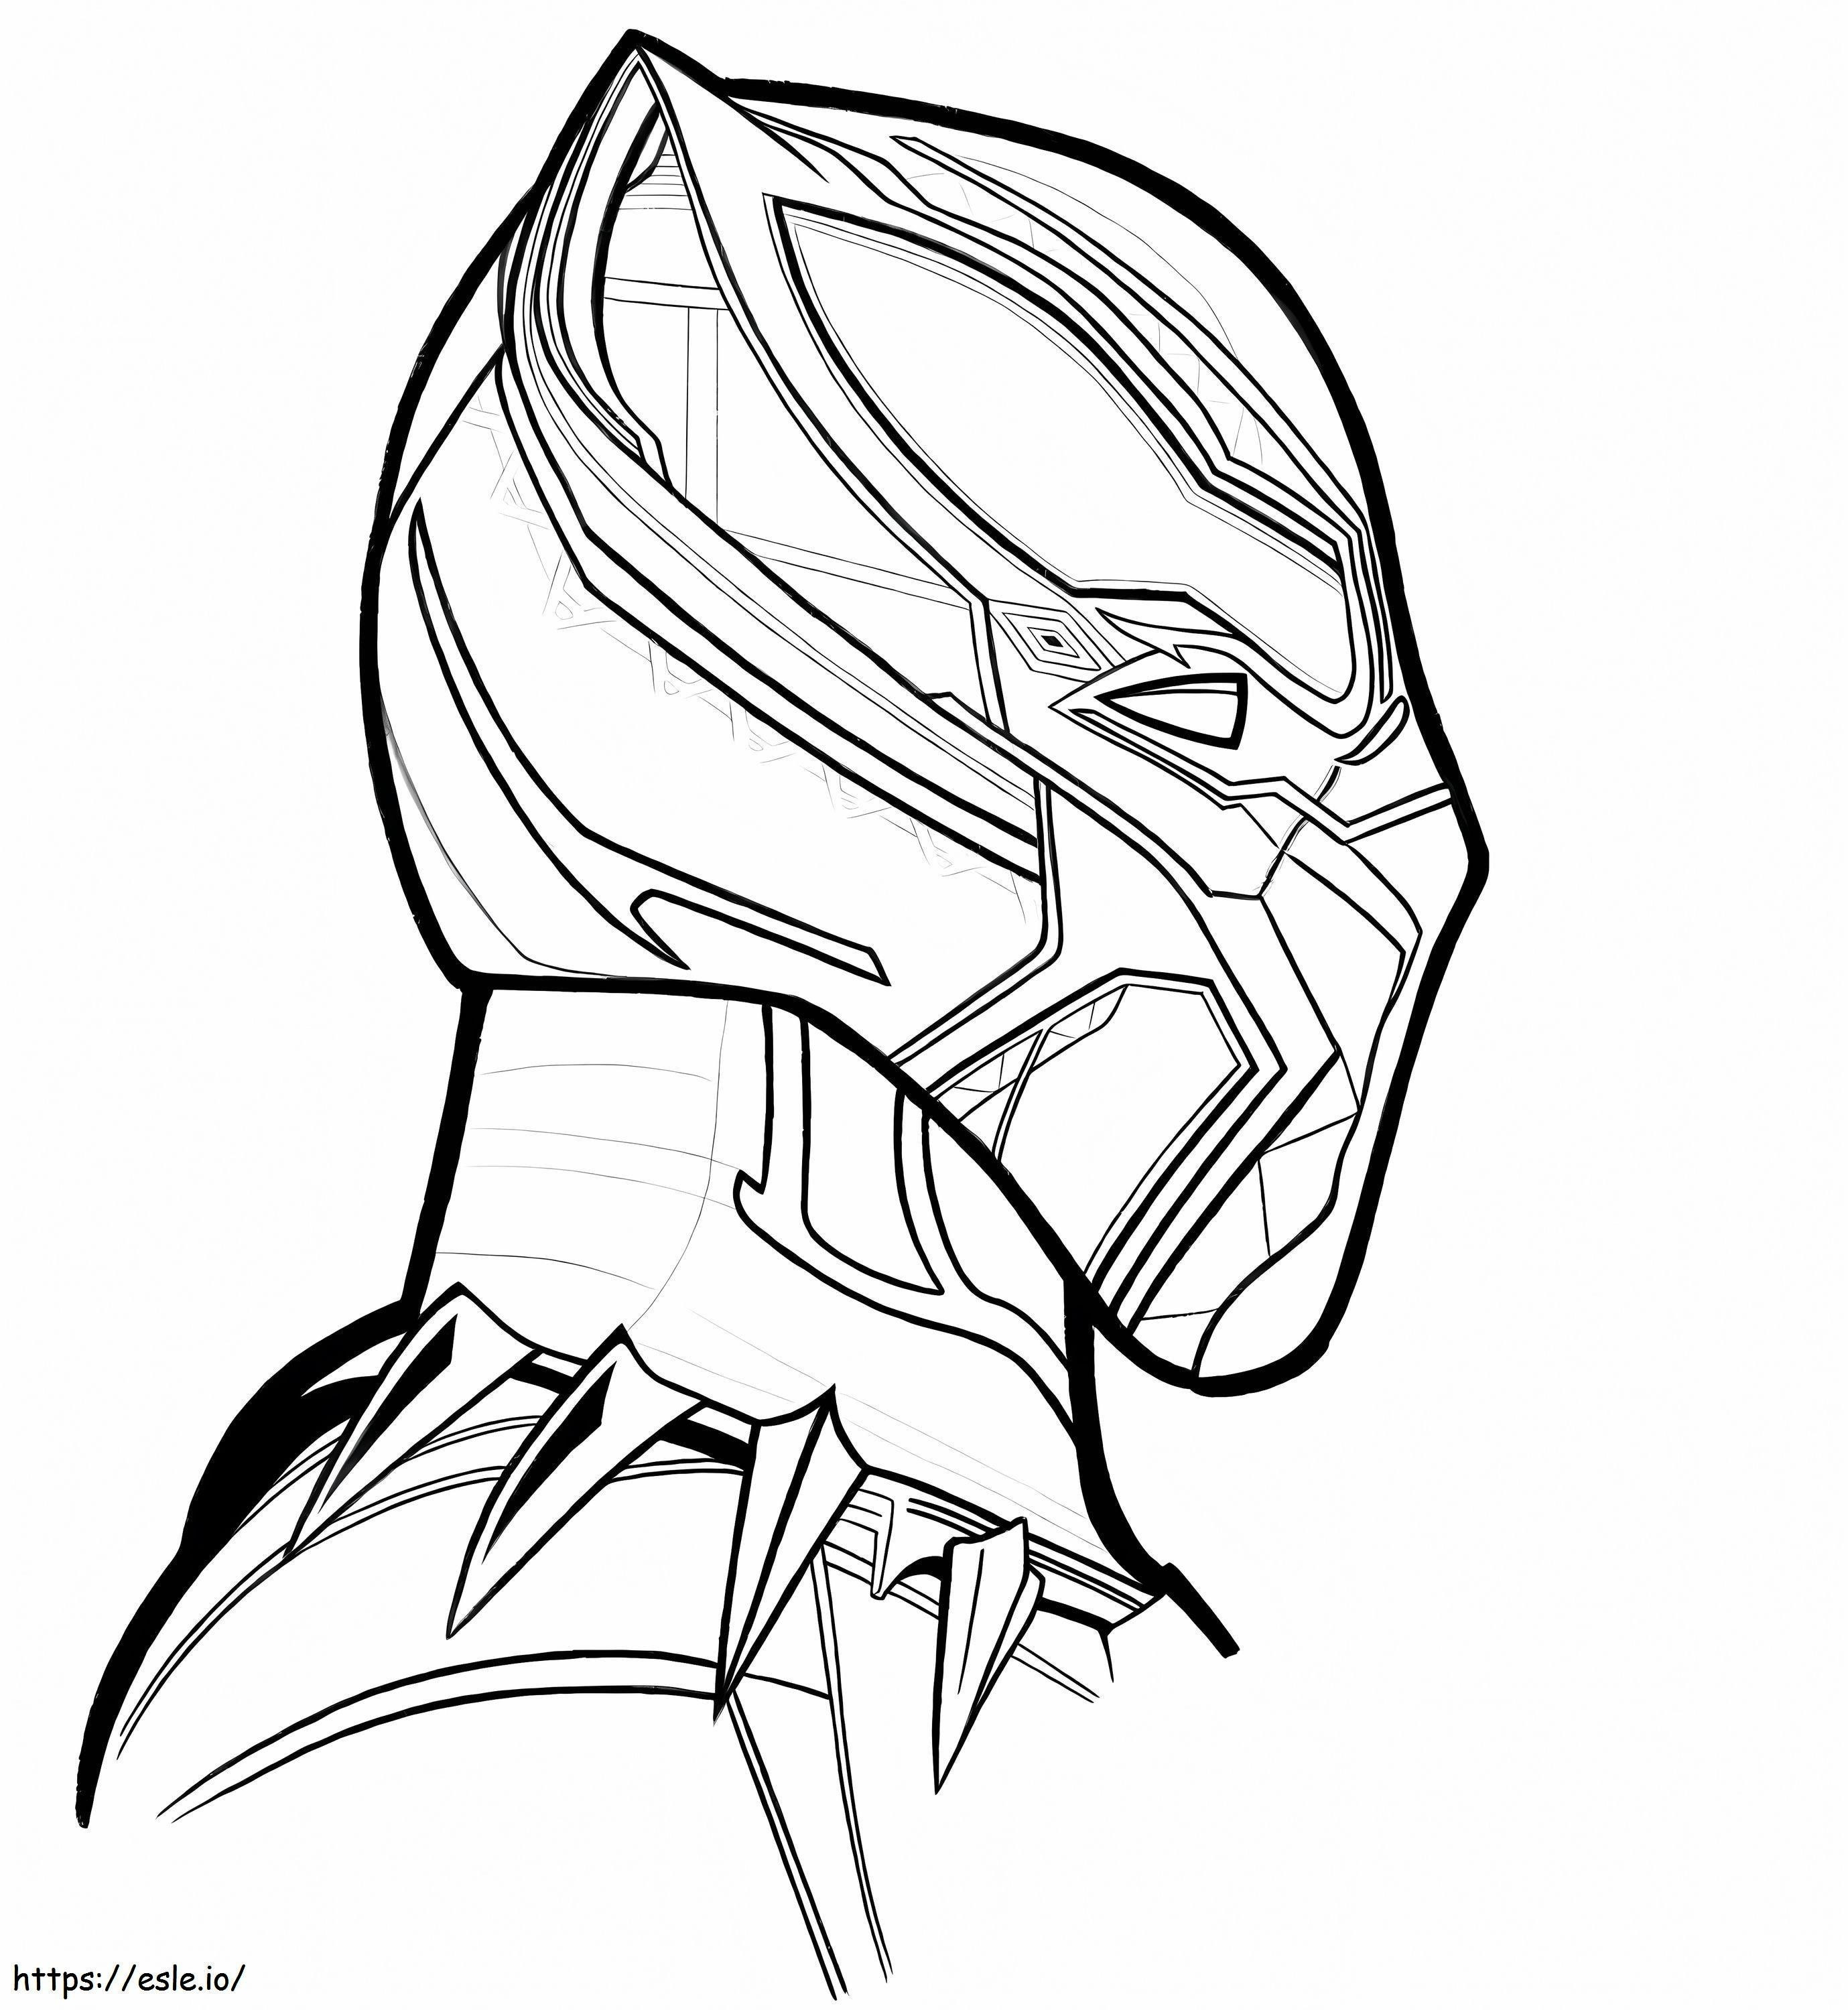 Awesome Black Panther Mask coloring page